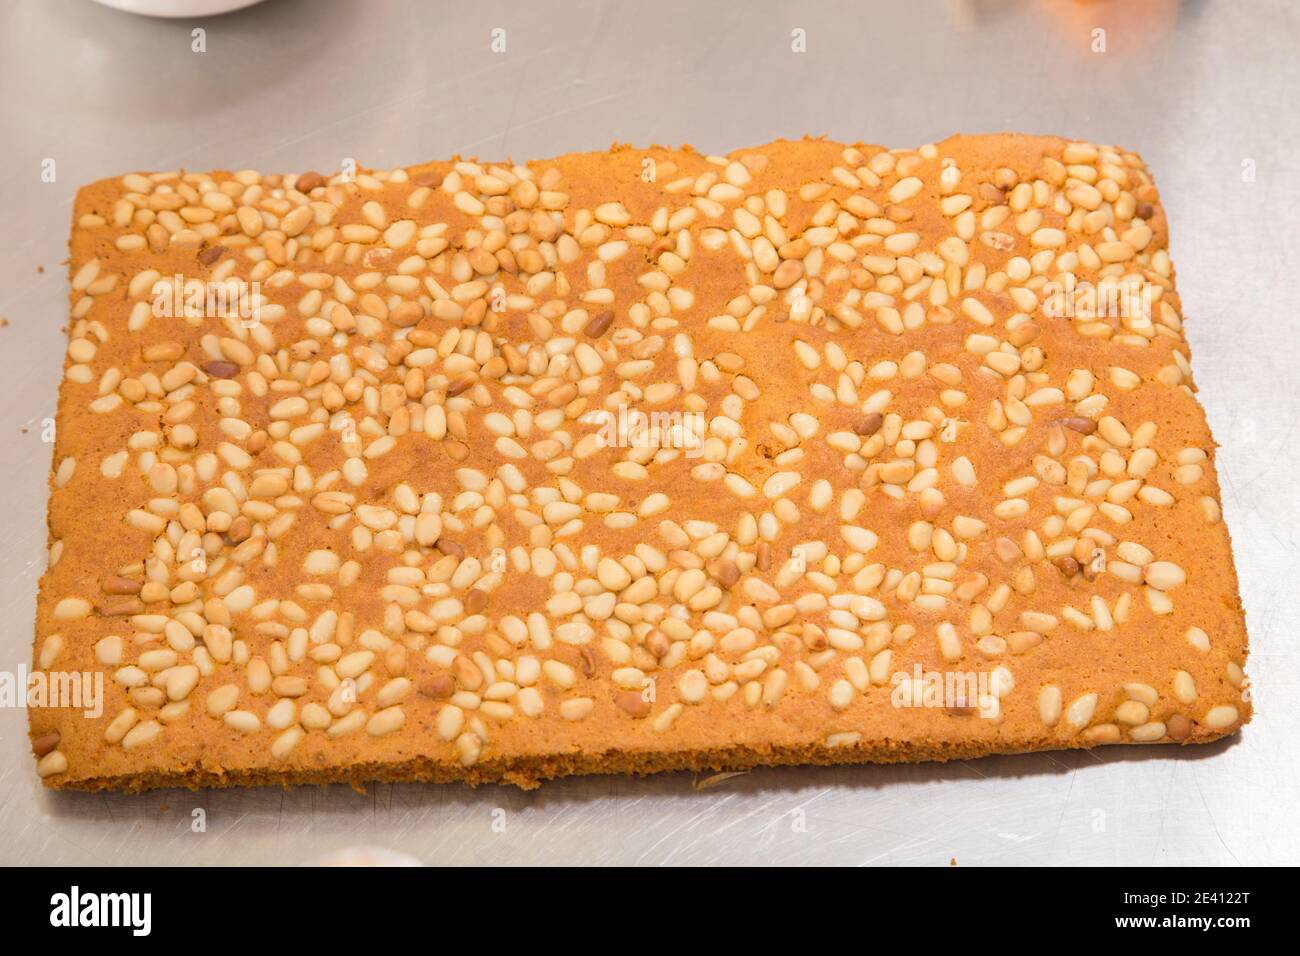 Ready carrot sponge cake with pine nuts. It is located on a metal surface. Close-up. Stock Photo